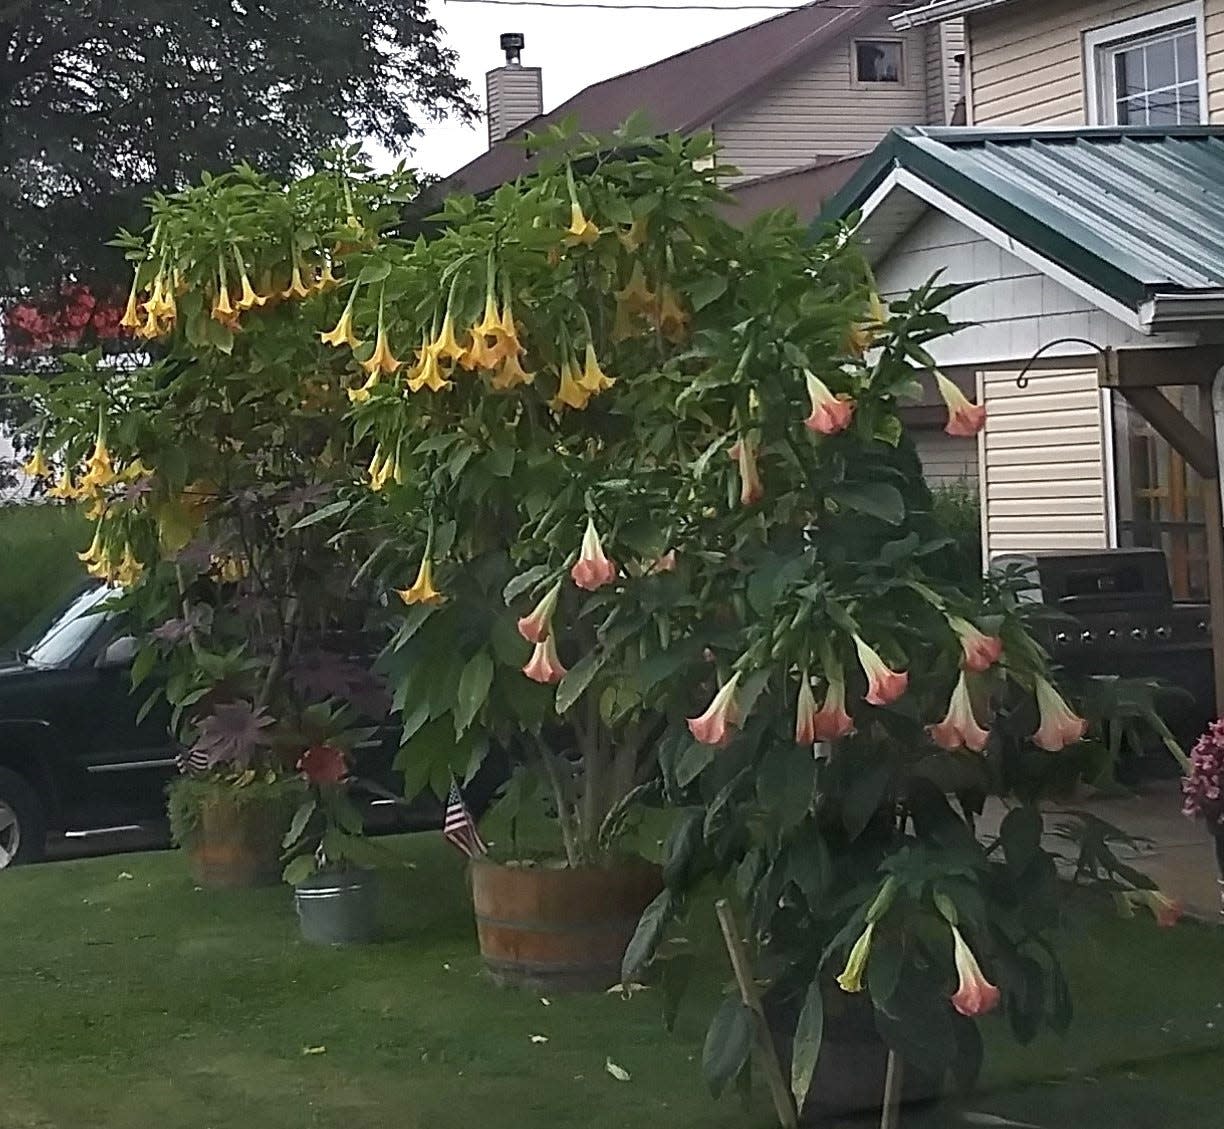 Angel's trumpet likes full sun with lots of water. It's best to plant it in mid-spring when outside temperatures no longer drop below 50 degrees at night.